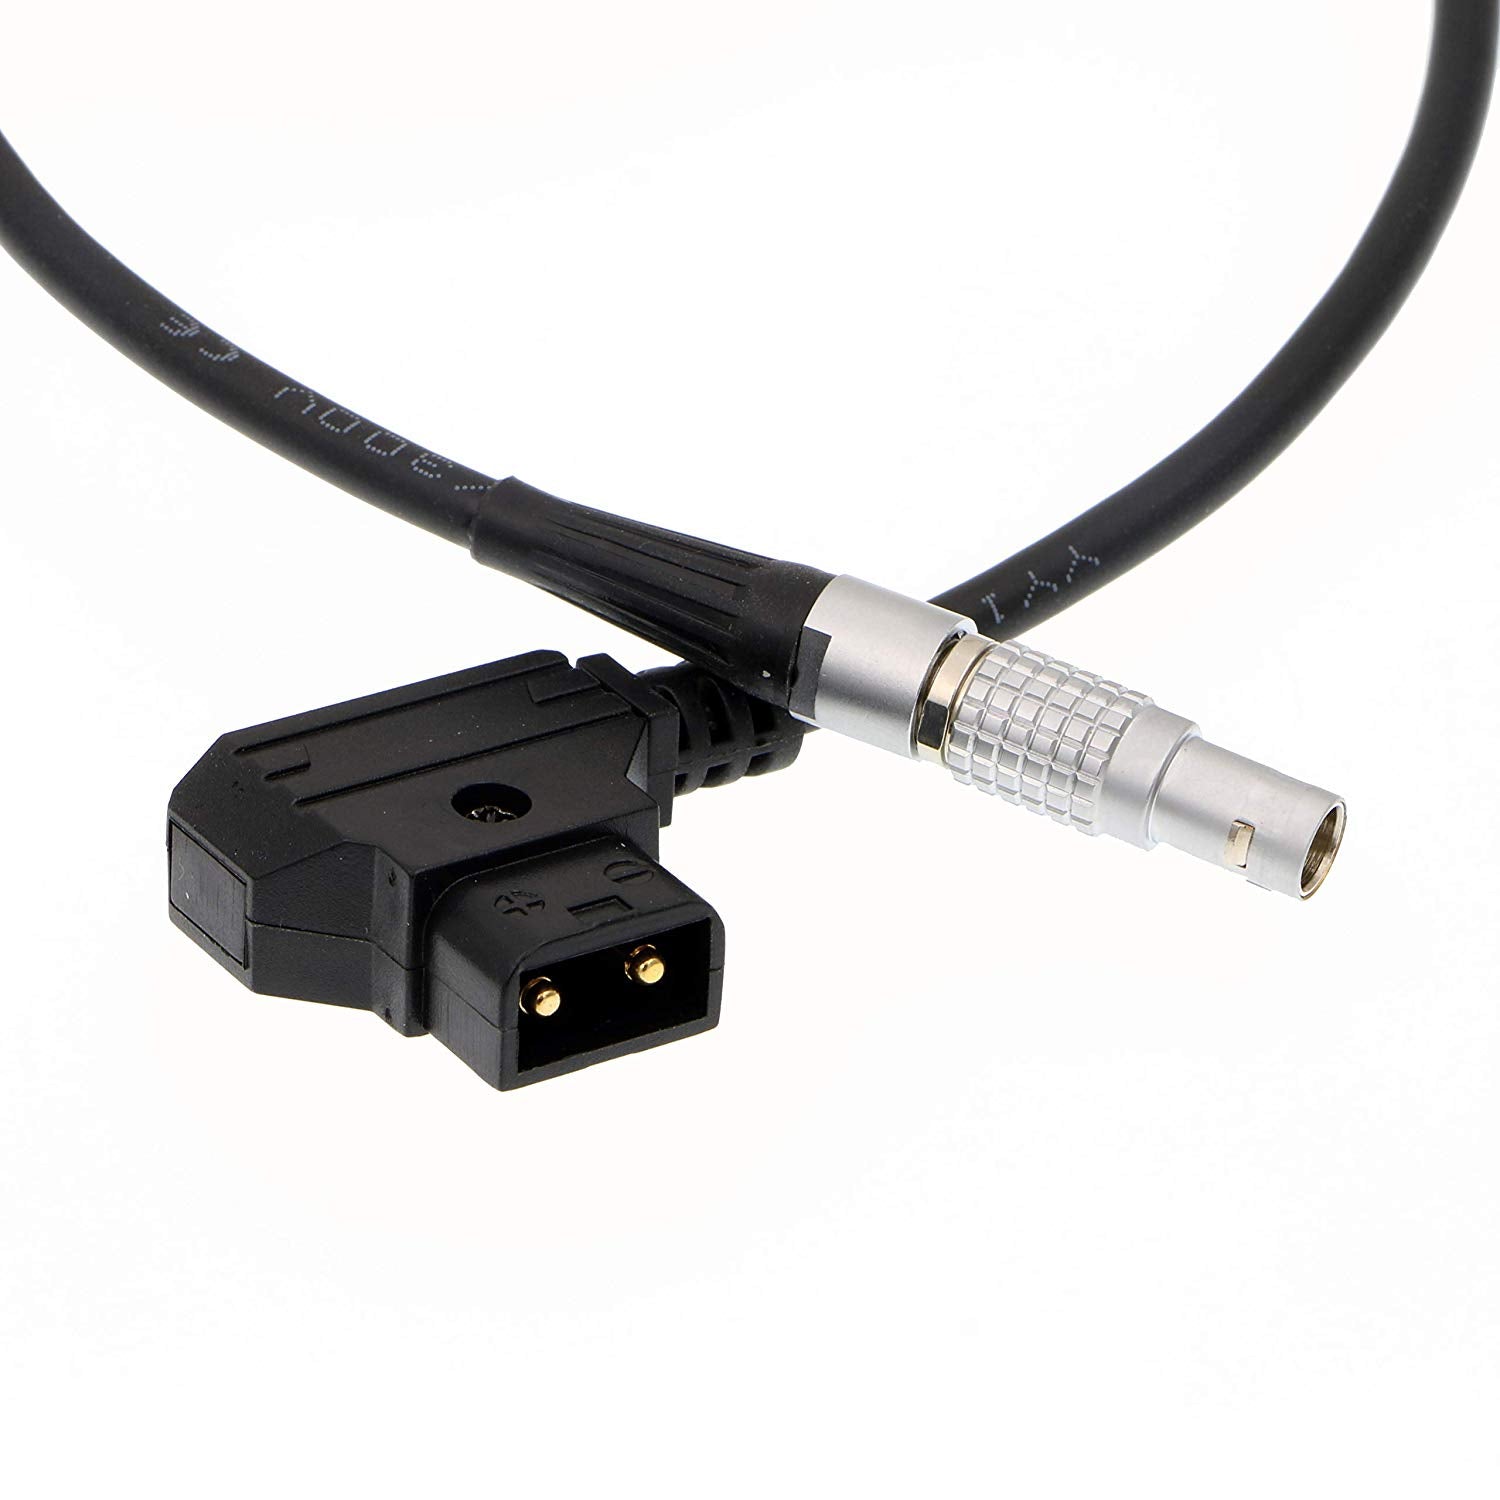 Alvin's Cables Motor Power Supply Cable for DJI Follow Focus System FGG 0B 6 Pin Male to D Tap